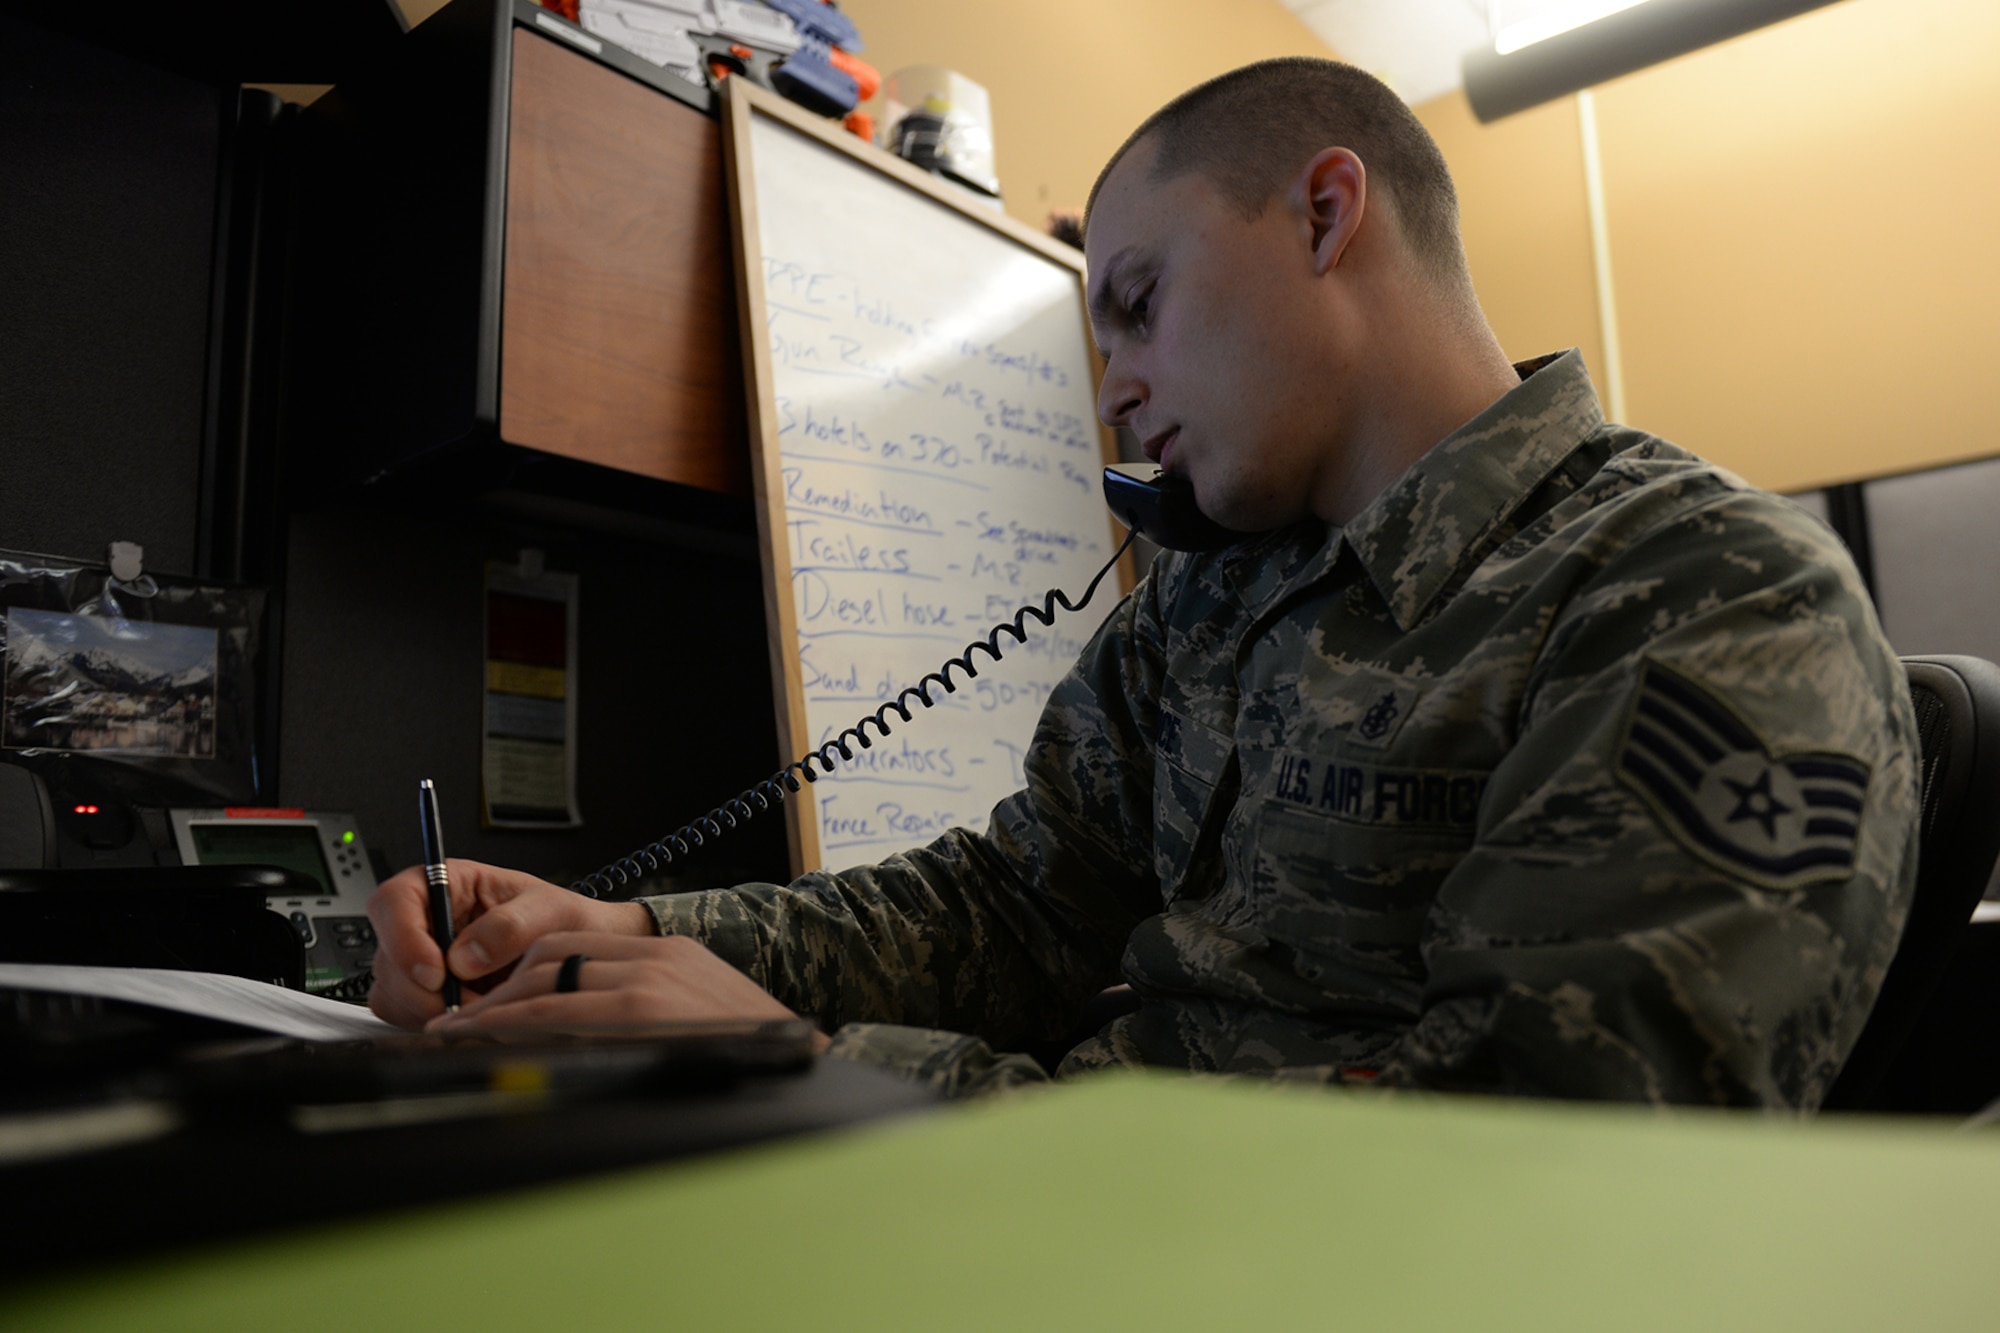 Staff Sgt. Jason Rice, 55th Contracting Squadron commodities flight NCO in charge, talks on the phone March 19, 2019, on Offutt Air Force Base, Neb. Rice was part of the team that completed 22 contract actions totaling $650,000 during recent flood preparations. (U.S. Air Force photo by Tech. Sgt. Rachelle Blake)